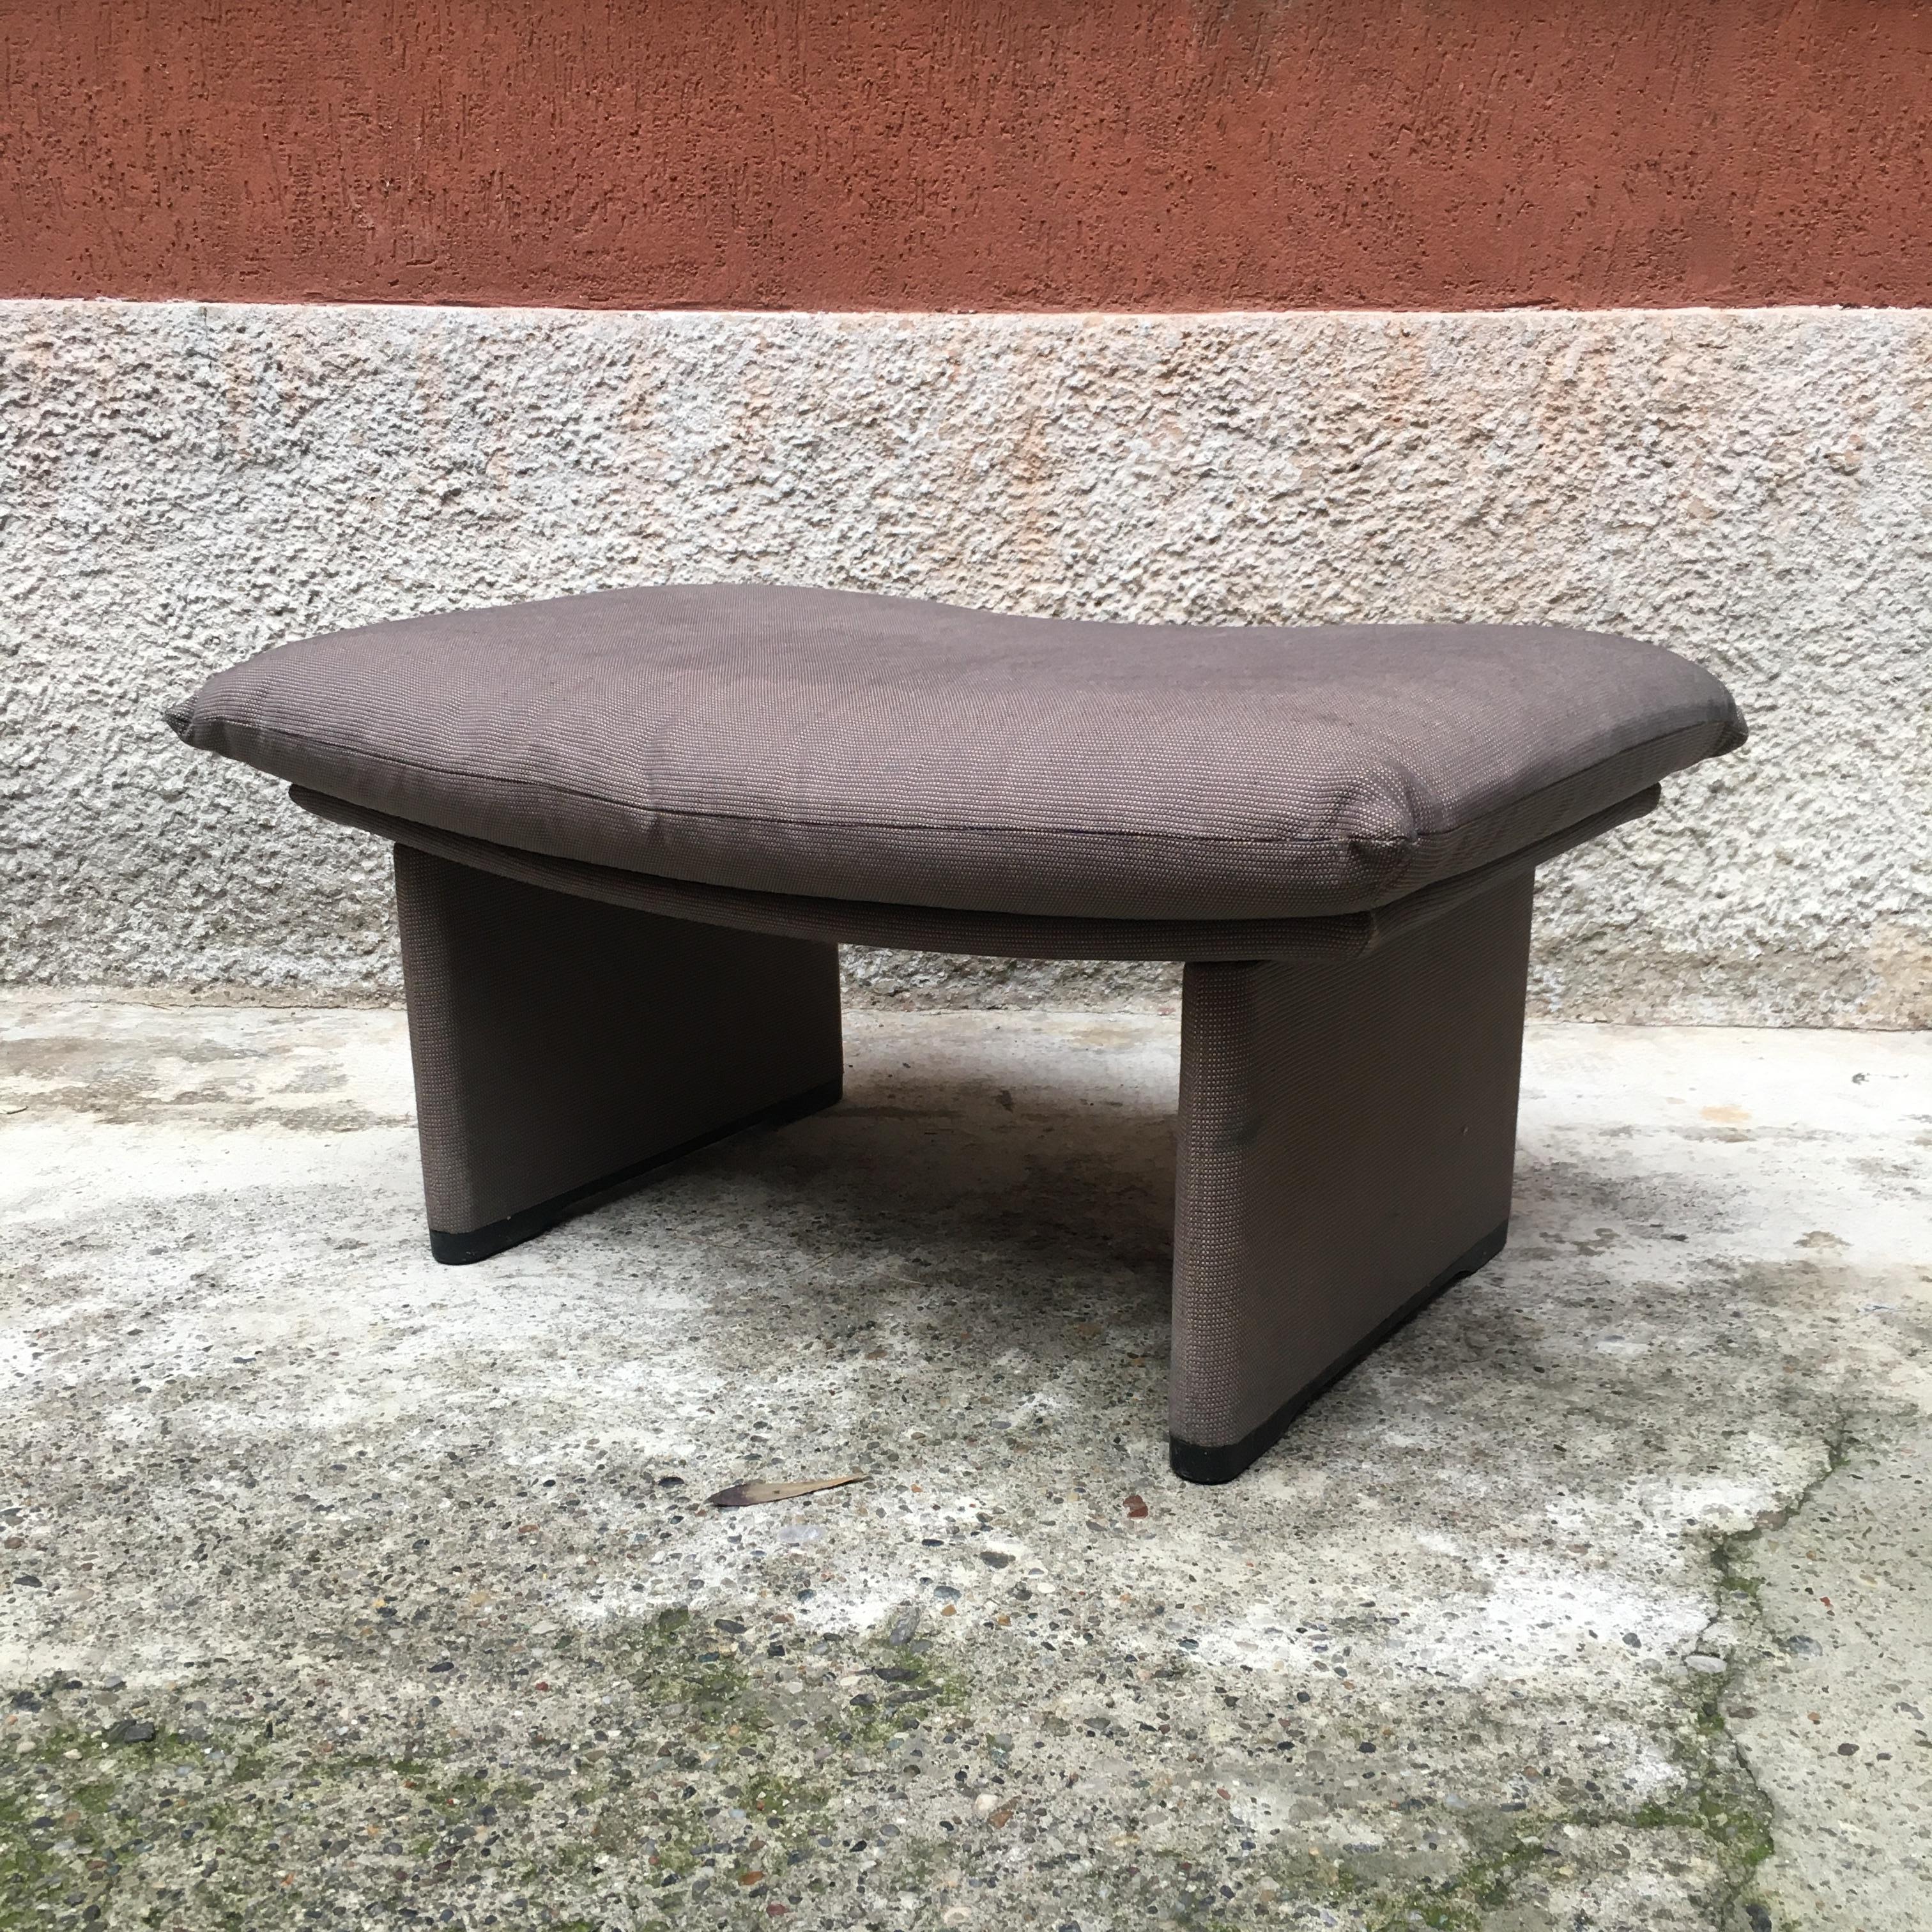 Italian wood structure and grey fabric padding pouf, 1980s. Grey pouf with wood internal structure, padded with its original grey fabric from the 1980s.